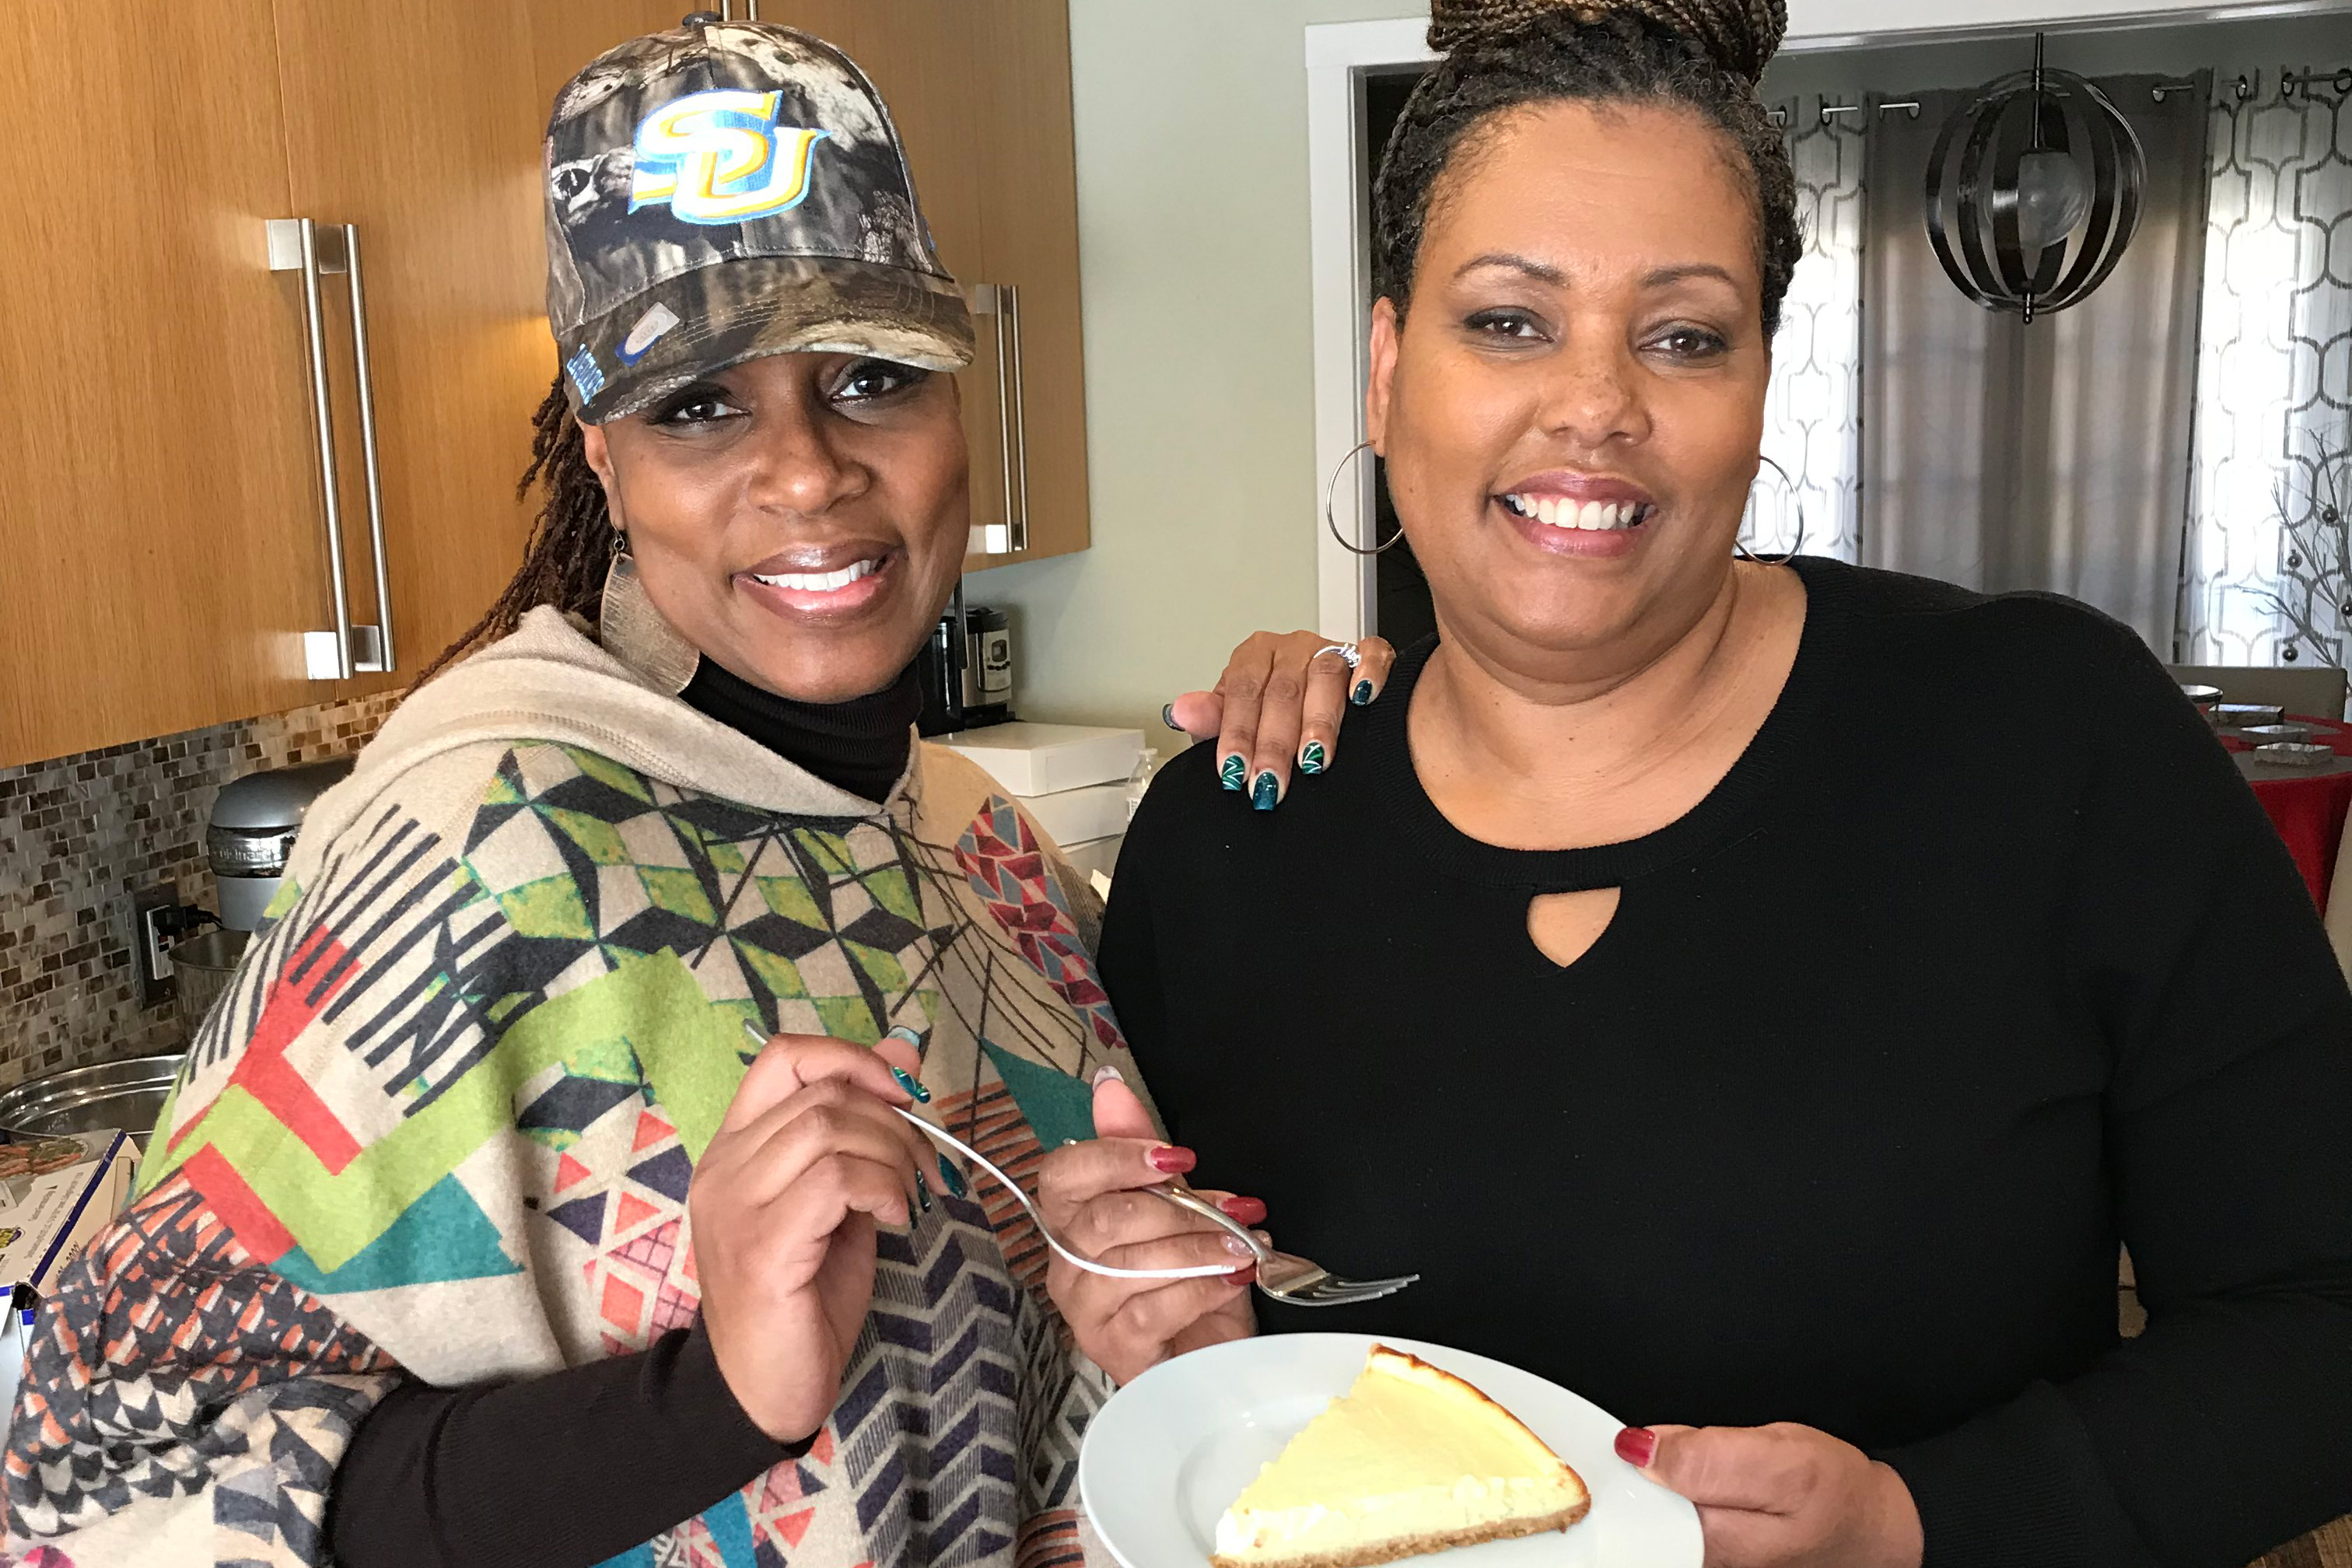 After the Government Shutdown Put These Sisters Out of Work, They Started a Cheesecake Business — and Now It’s Taking Off